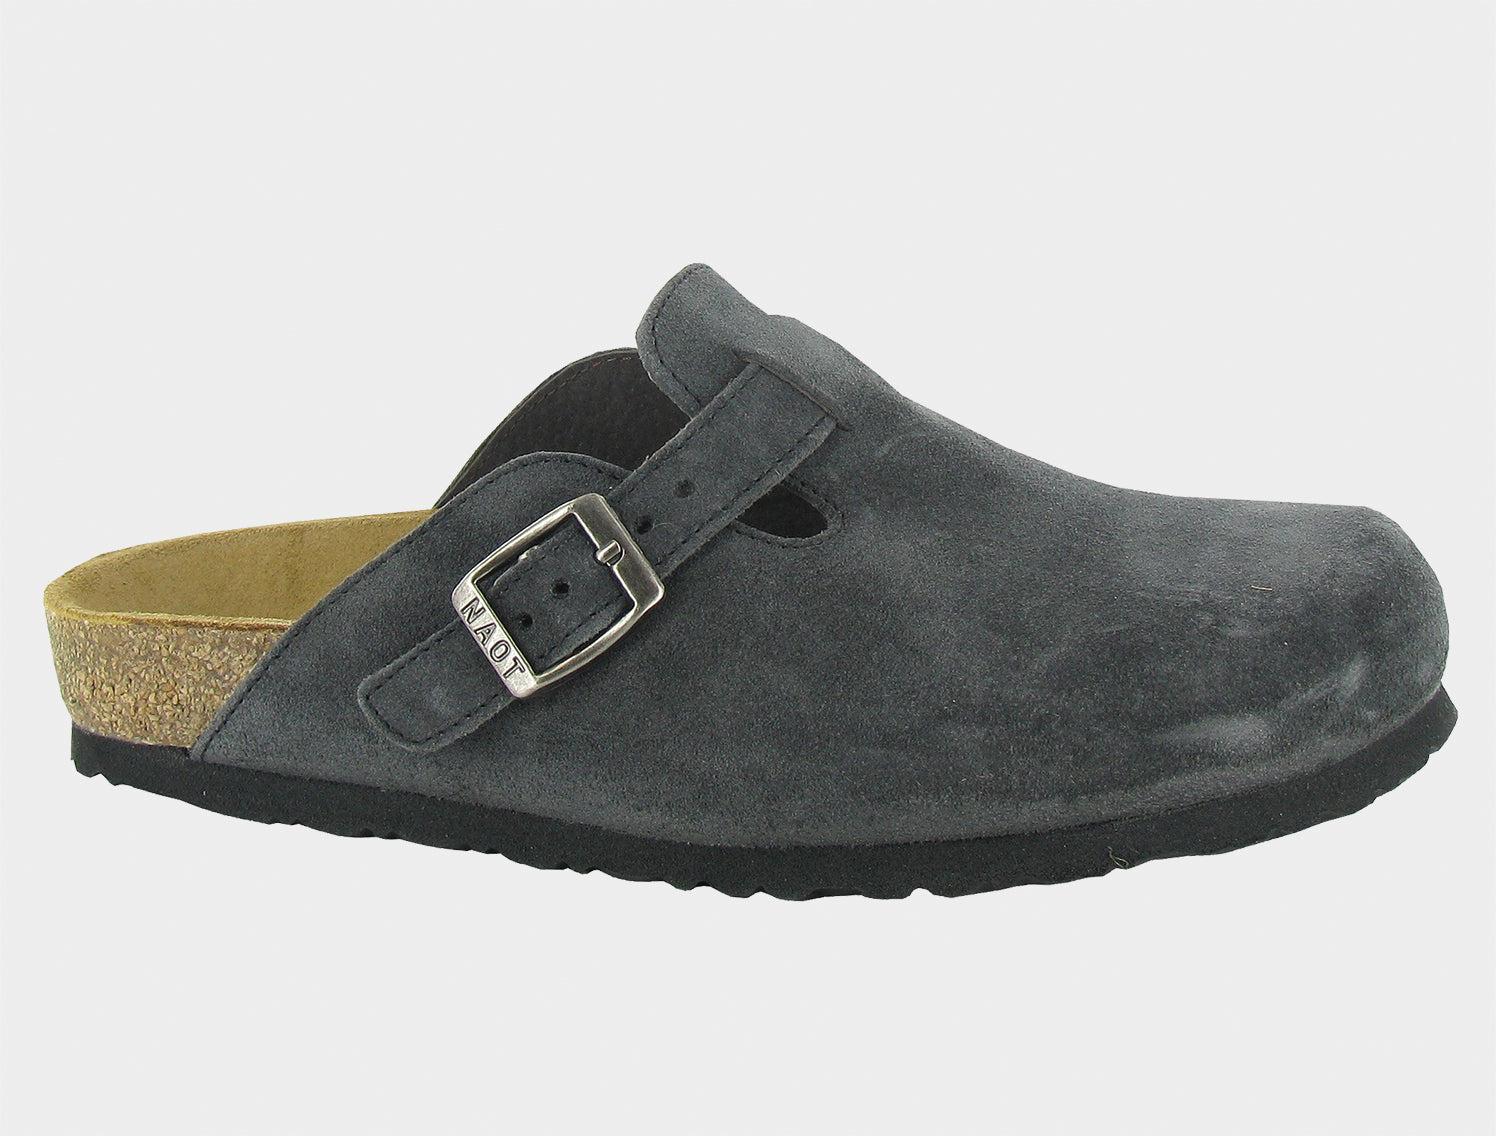 Naot Women's Classic Spring Clogs Oily Midnight Suede